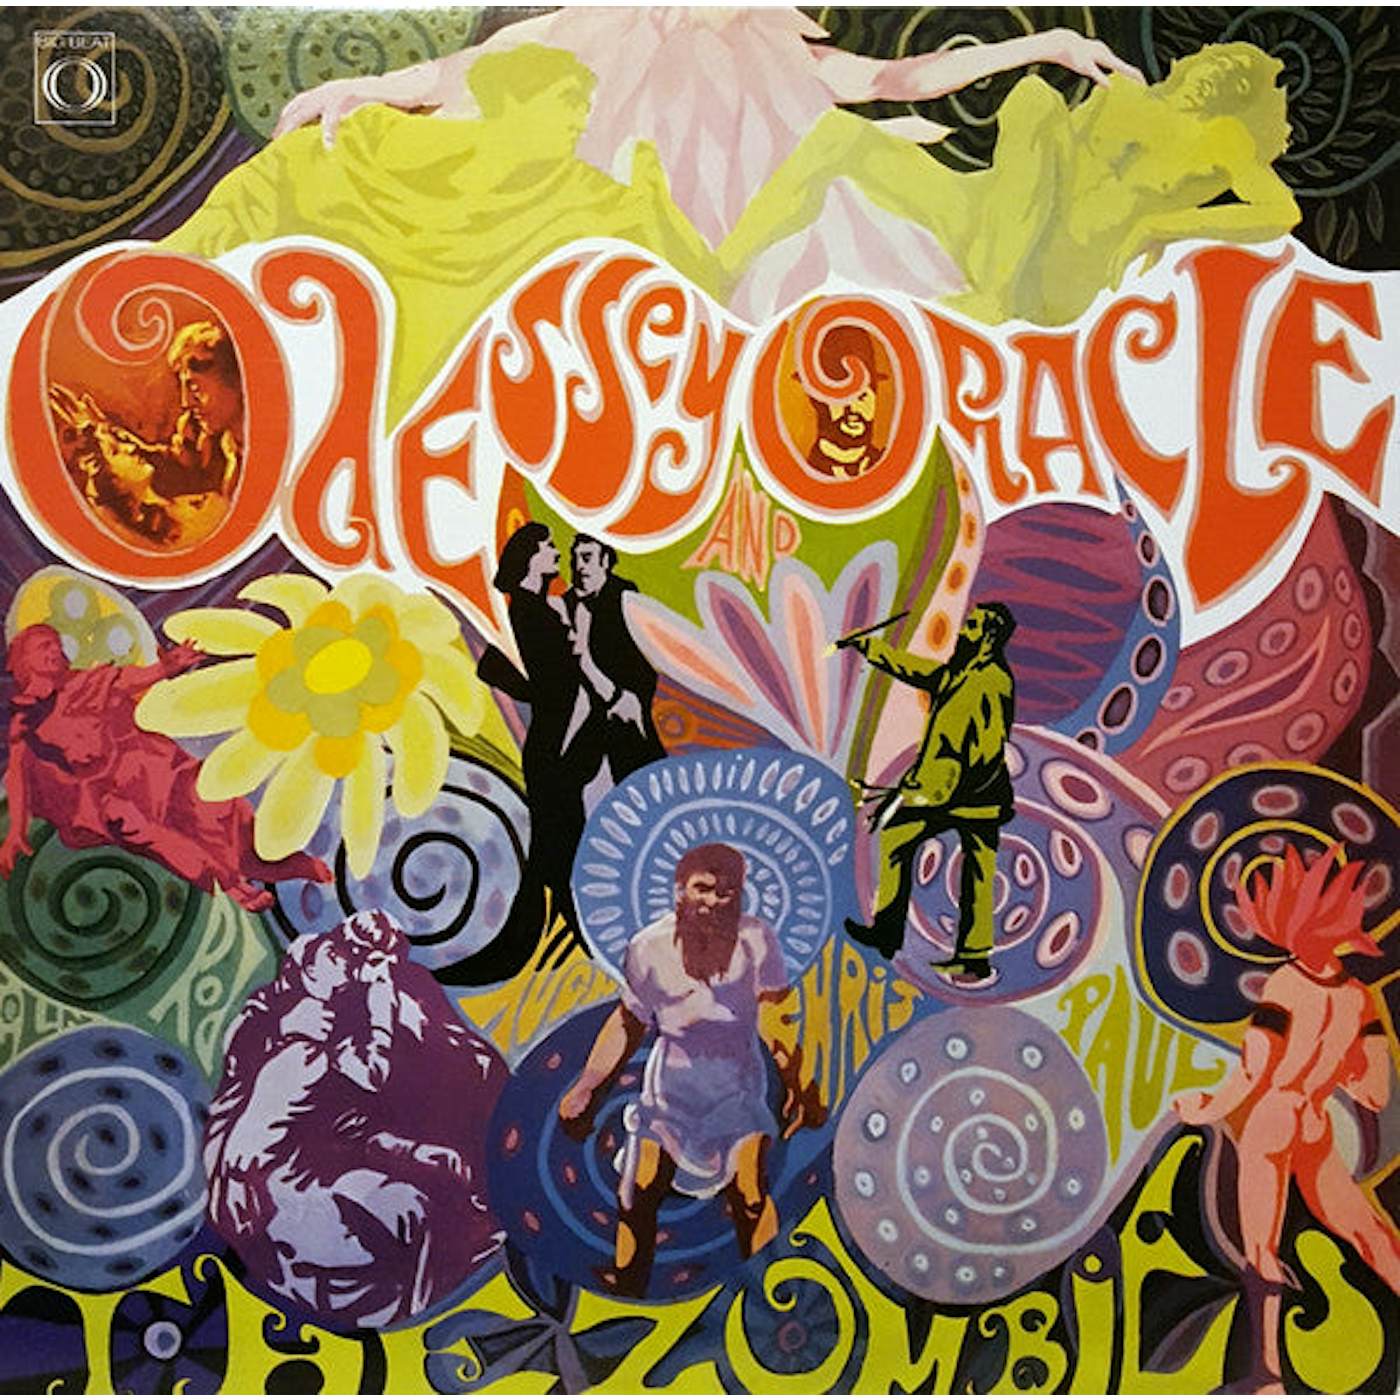 The Zombies LP Vinyl Record - Odessey & Oracle